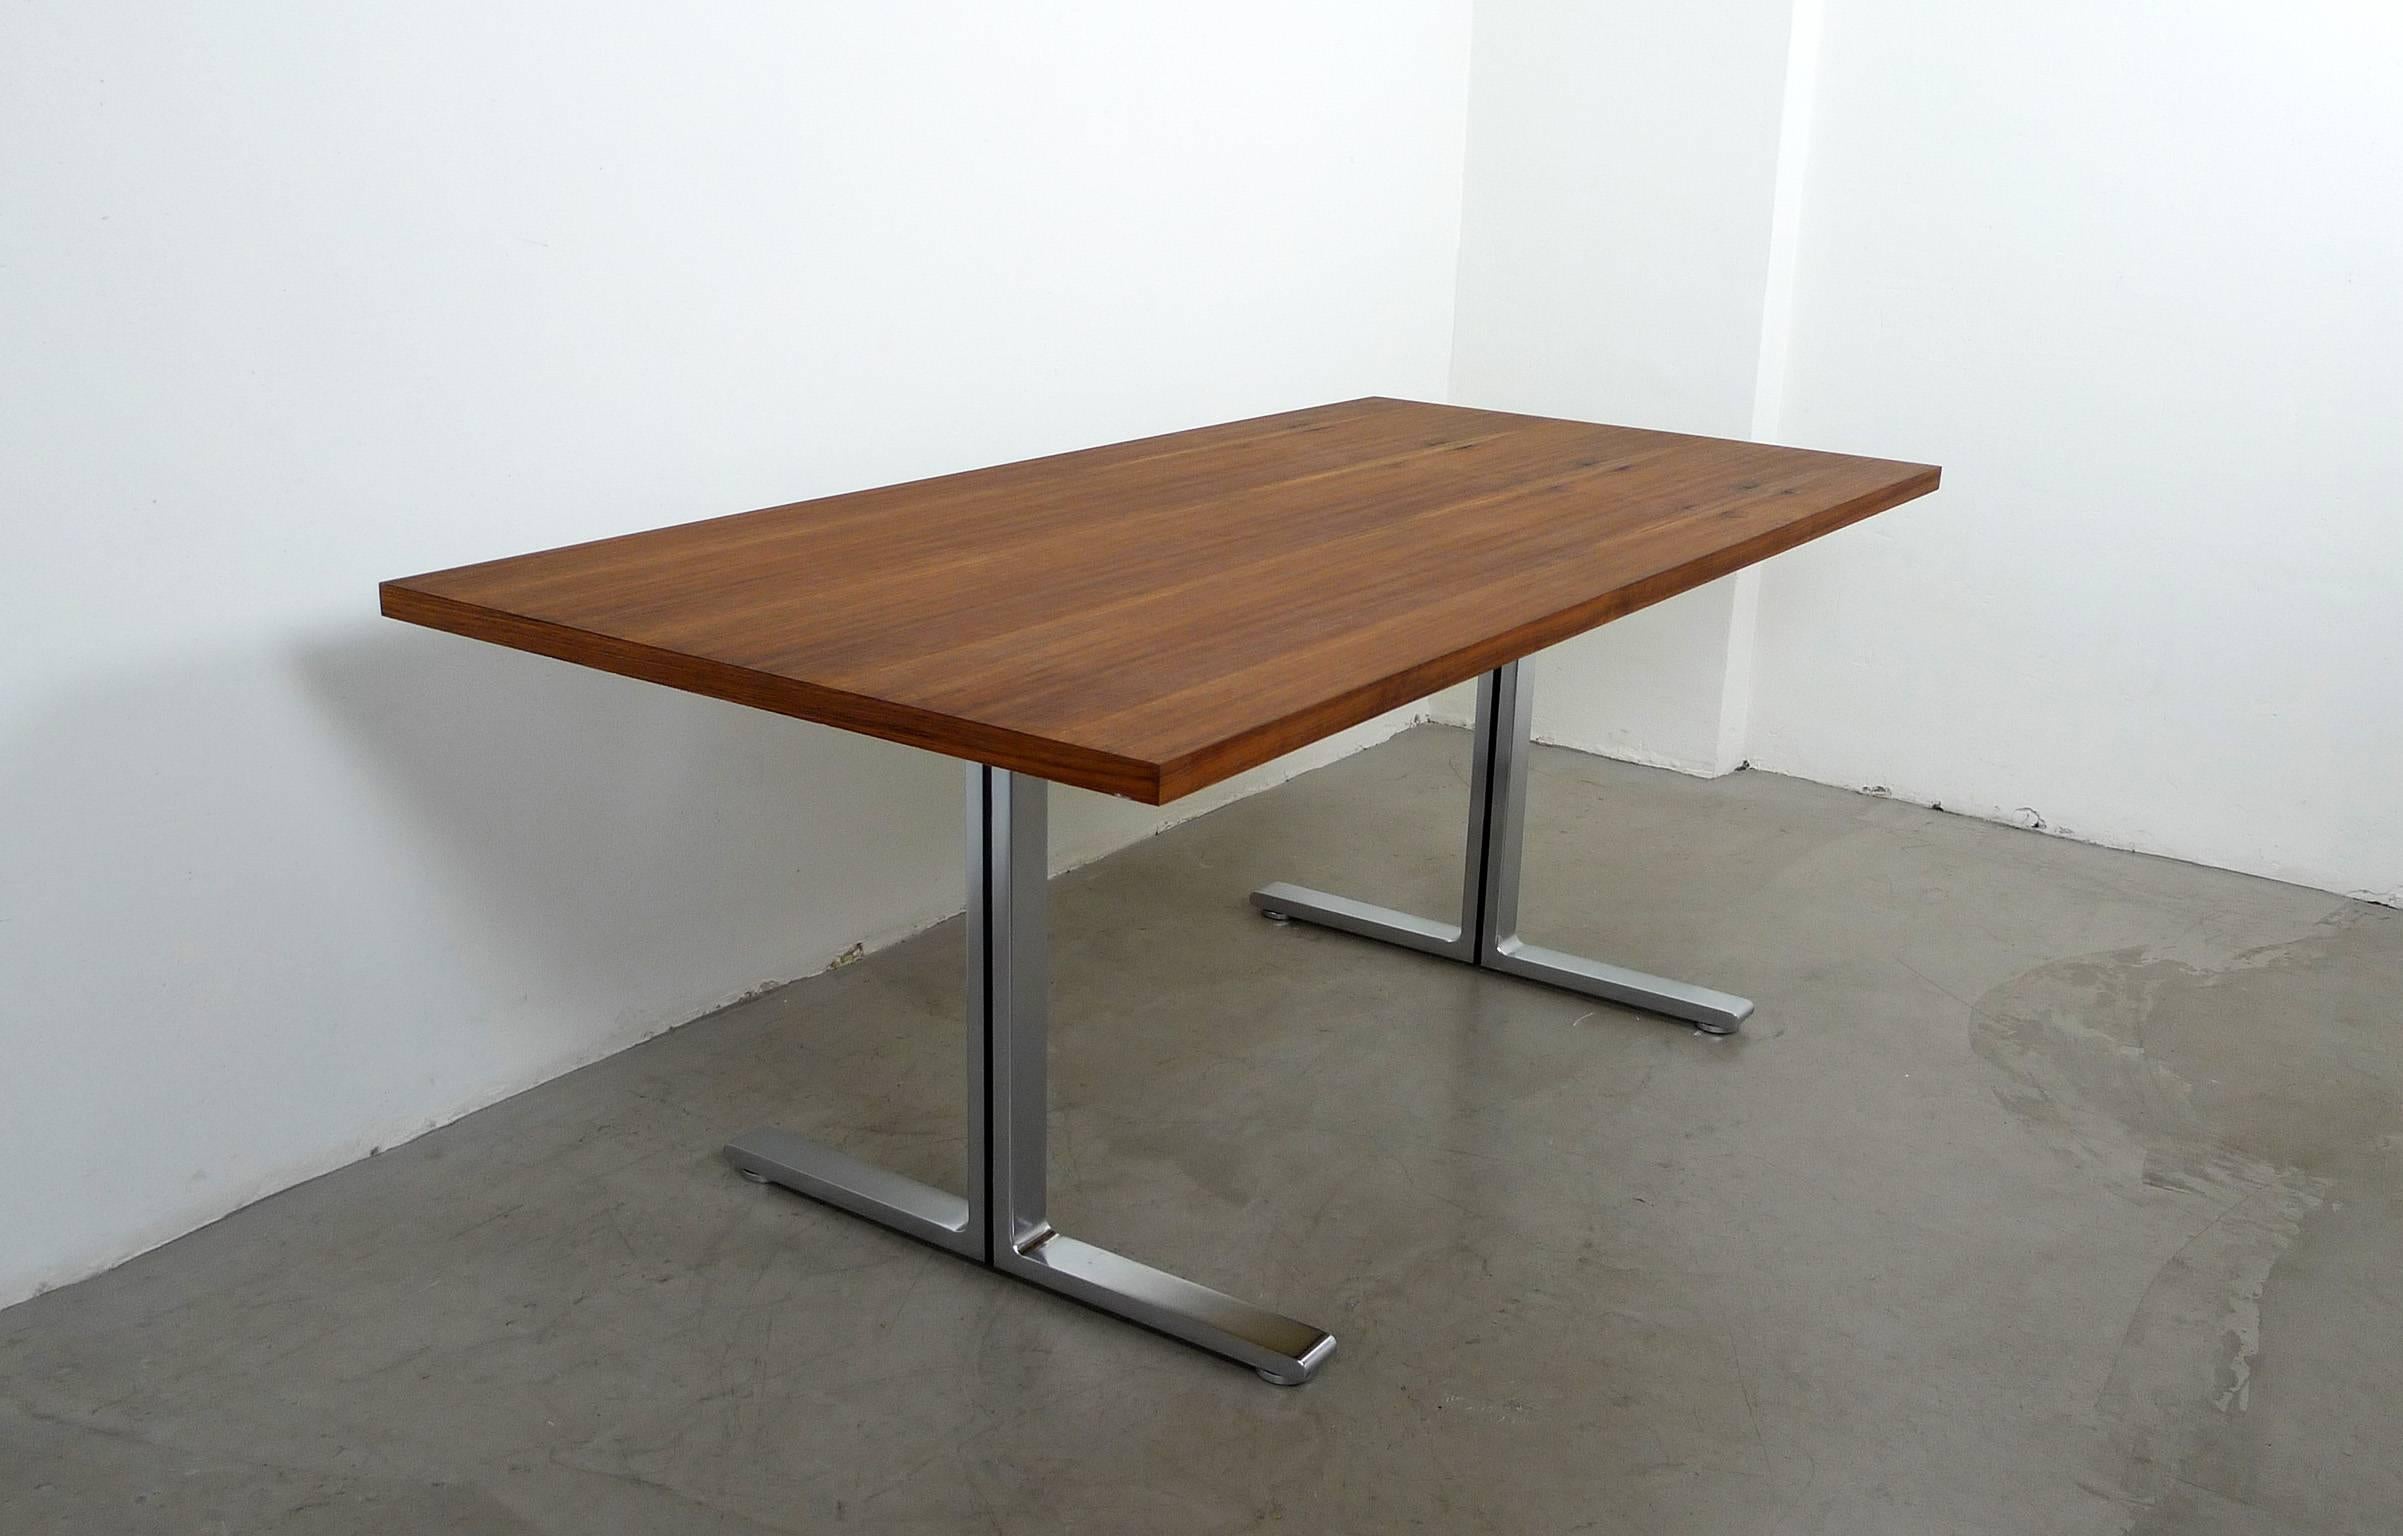 This walnut table from the Alpha series was produced by German manufacturer Walter Knoll in the 1970s. It can be used as a working or dining table. The table features a stabile polished steel base with four round adjustable feet to balance out